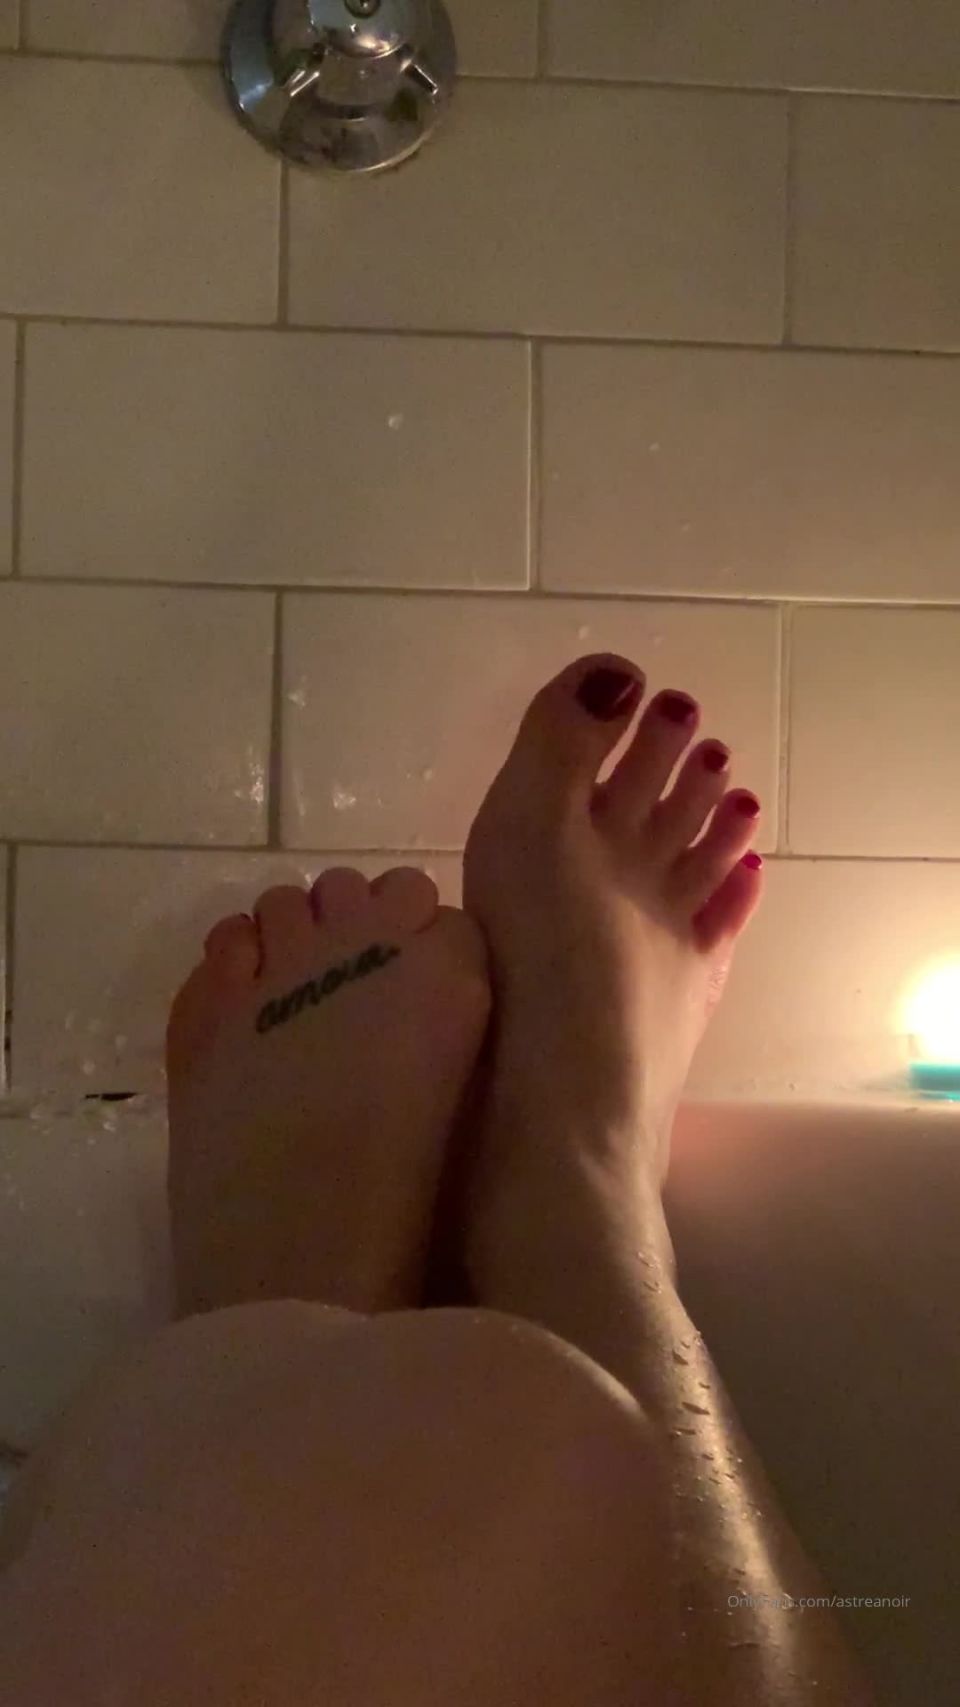 Onlyfans - Astrea Noir - astreanoirJoin me and my adorable feet in the tub - 22-03-2020